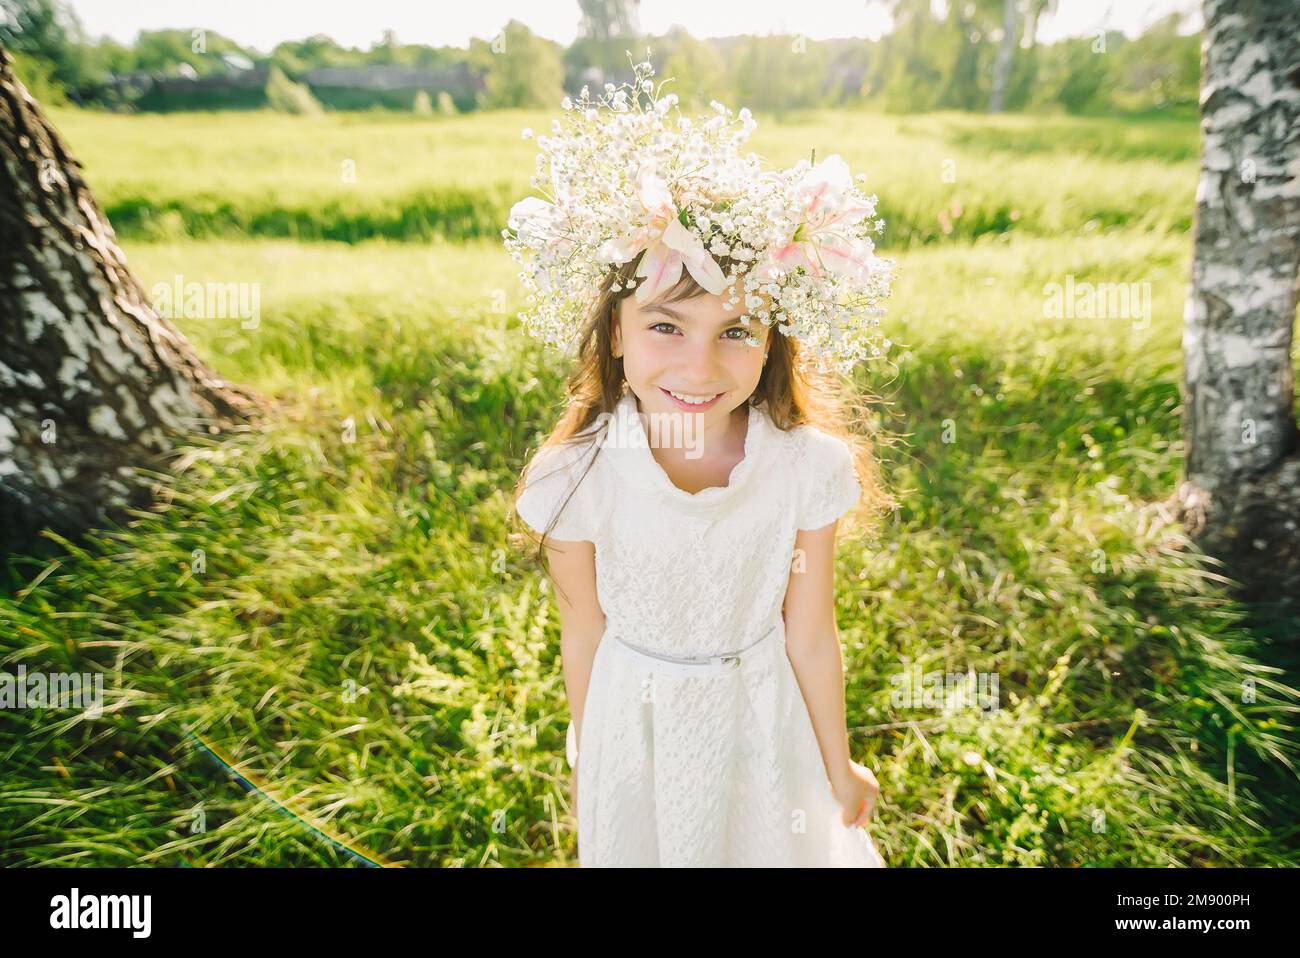 happy young girl with a wreath of flowers on her head Caucasian appearance smiling in the summer outdoors Stock Photo